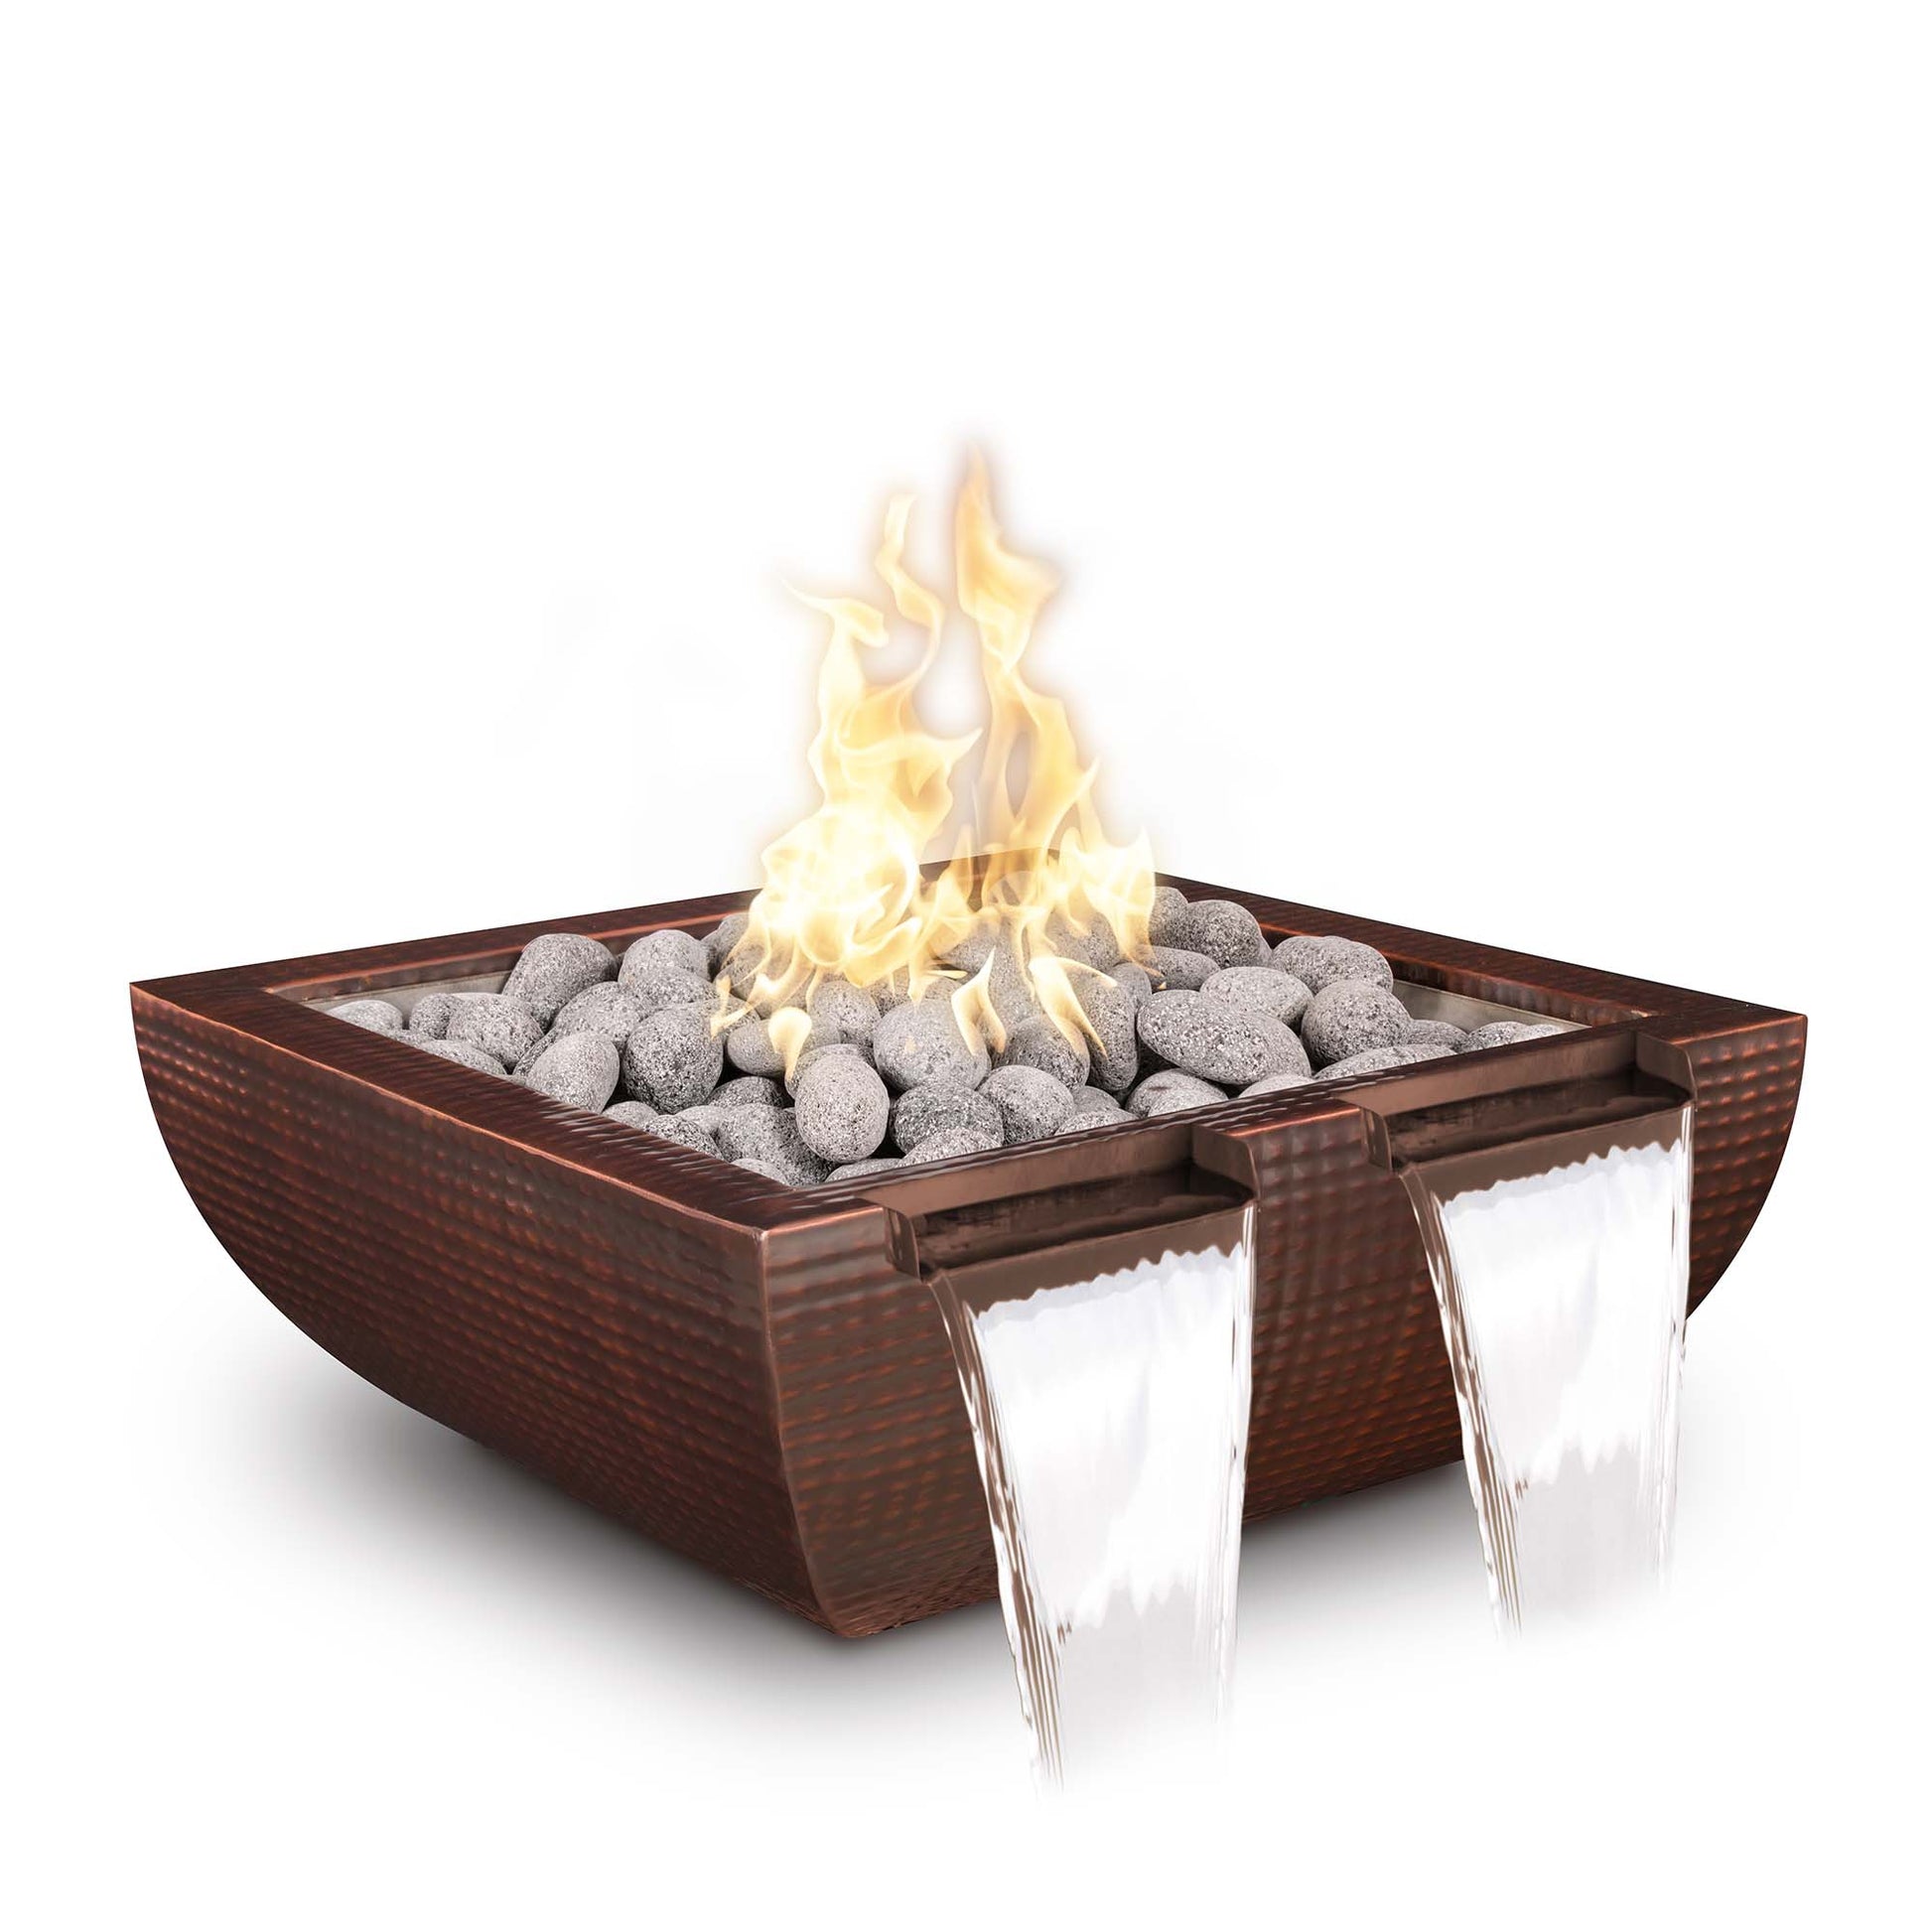 The Outdoor Plus Avalon Twin Spill 36" Java Powder Coated Metal Liquid Propane Fire & Water Bowl with Match Lit Ignition